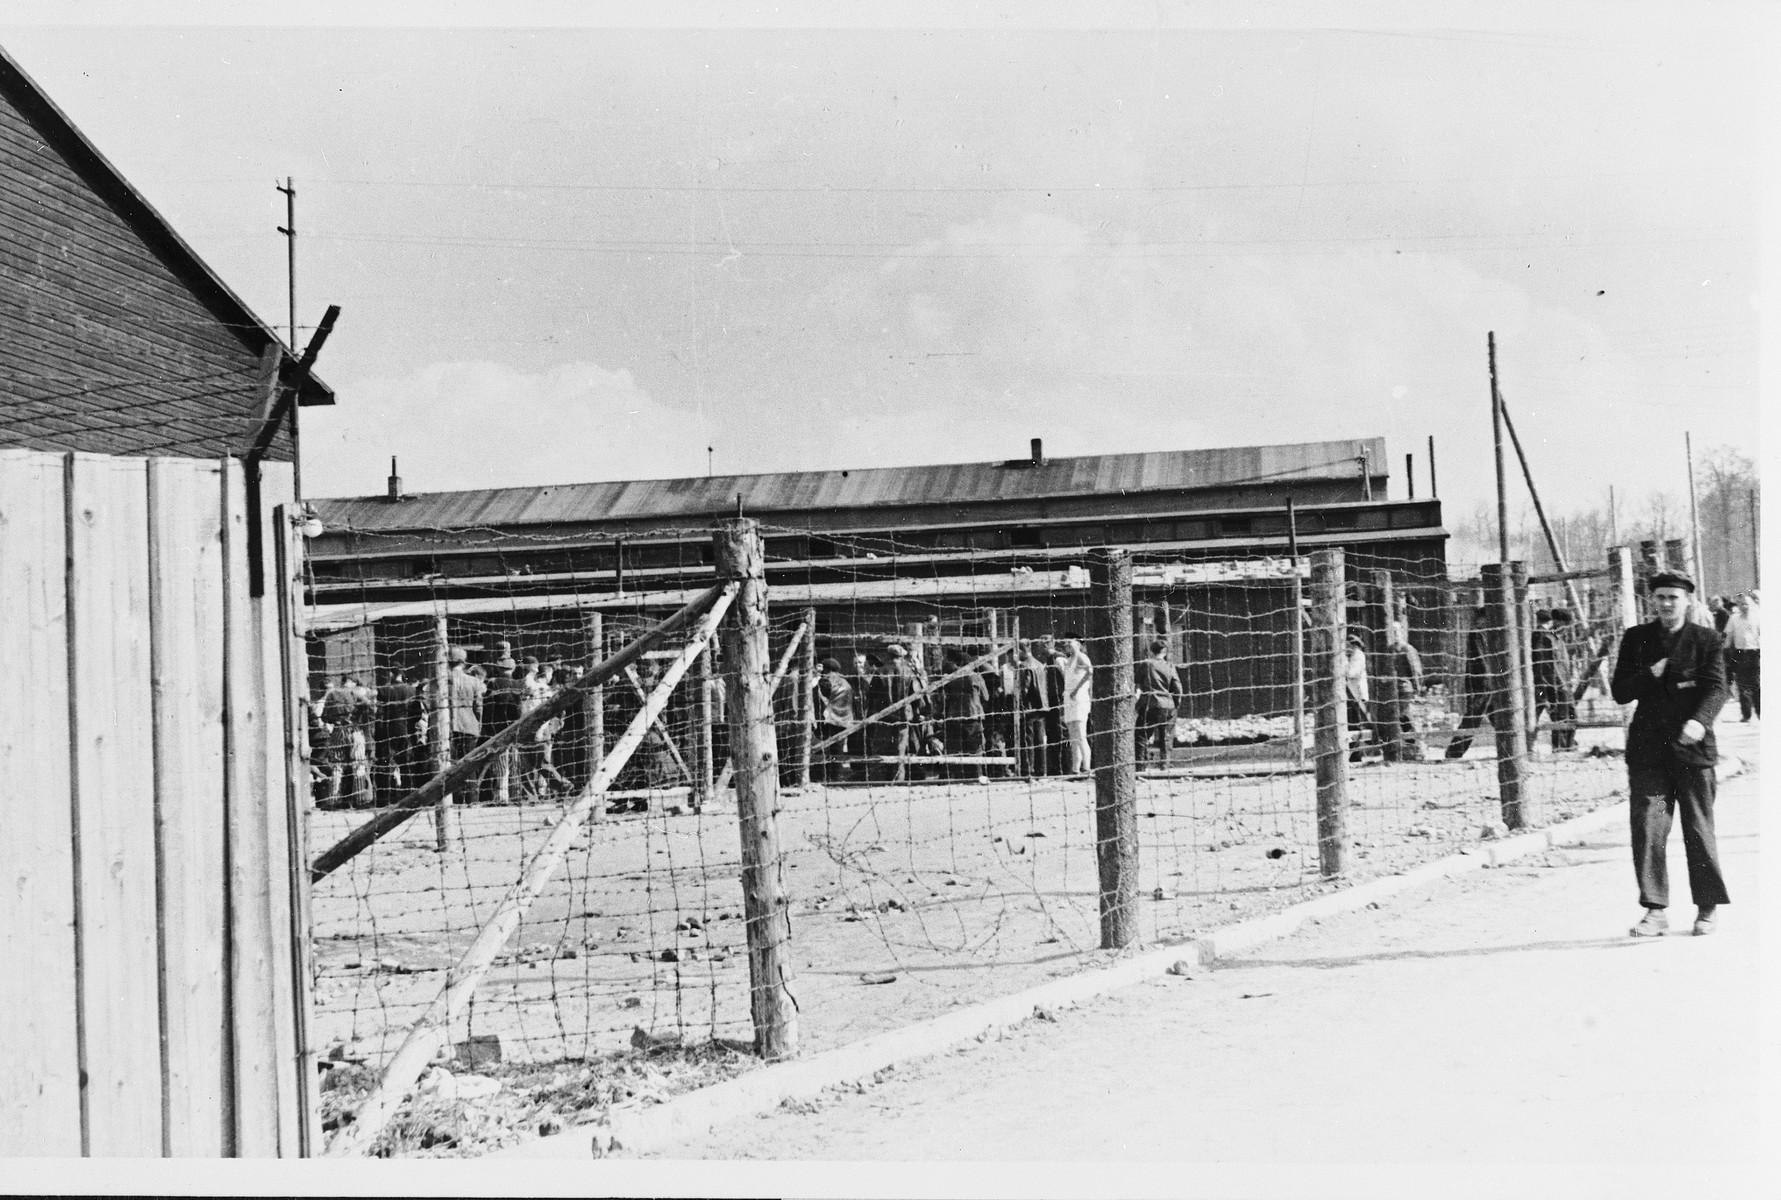 View of a fenced off section of the Buchenwald concentration camp soon after the liberation.